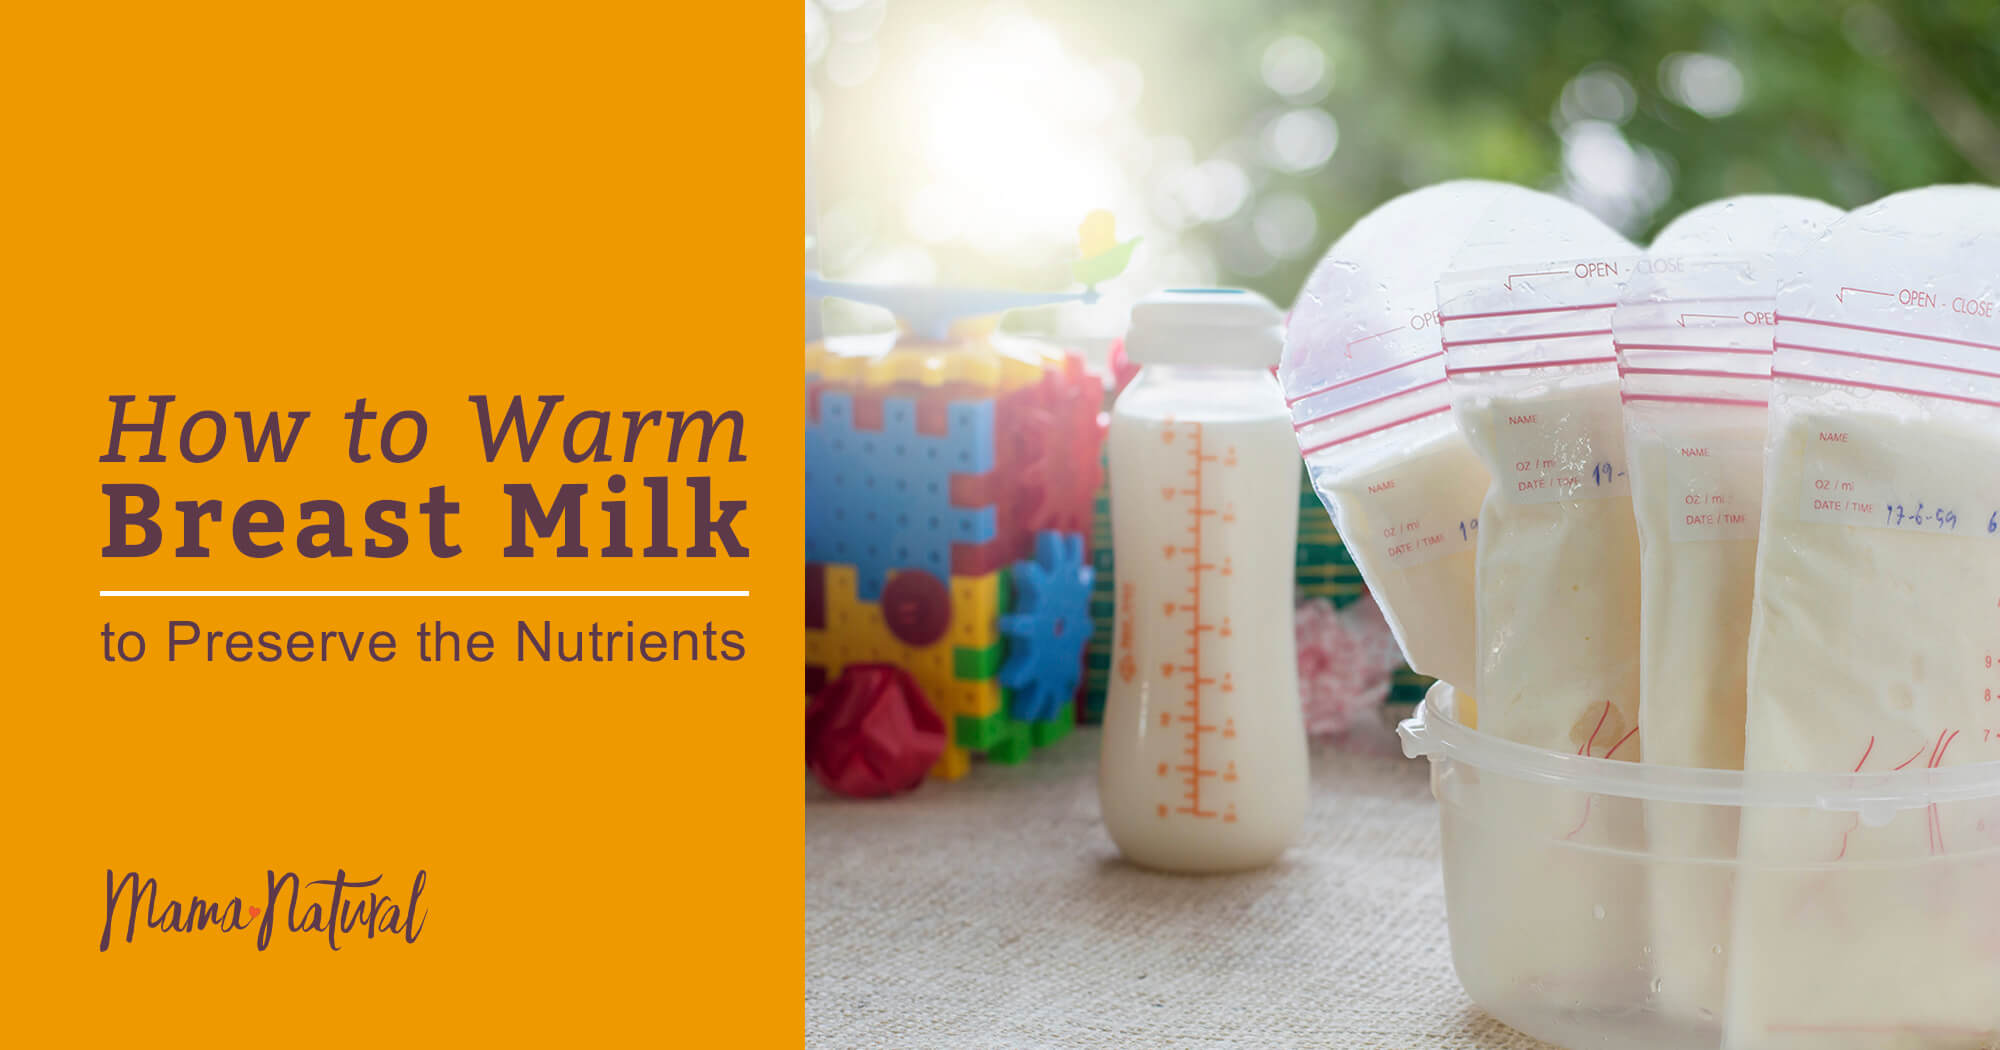 https://www.mamanatural.com/wp-content/uploads/How-to-Warm-Breast-Milk-to-Preserve-the-Nutrients-parenting-post-by-Mama-Natural-Facebook.jpg